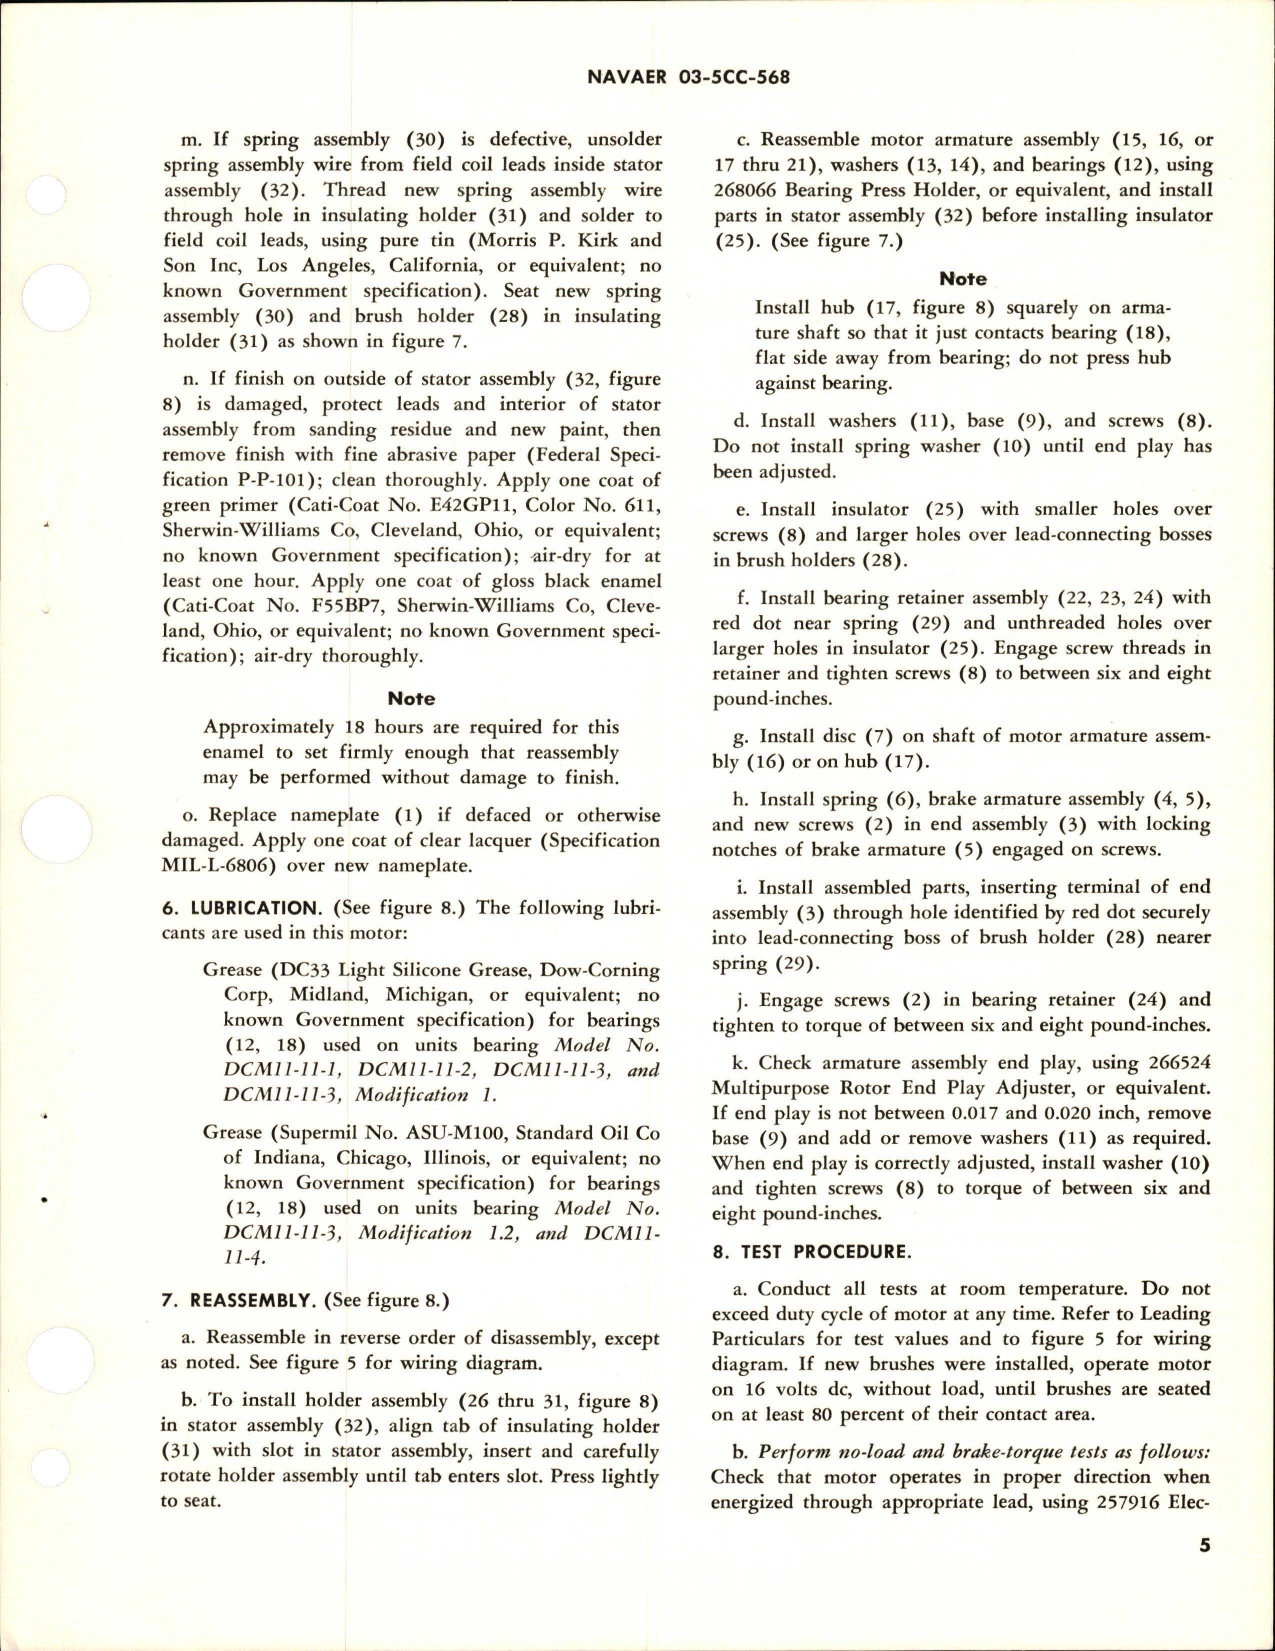 Sample page 5 from AirCorps Library document: Overhaul Instructions with Parts Breakdown for Direct Current Motor - Part 36848